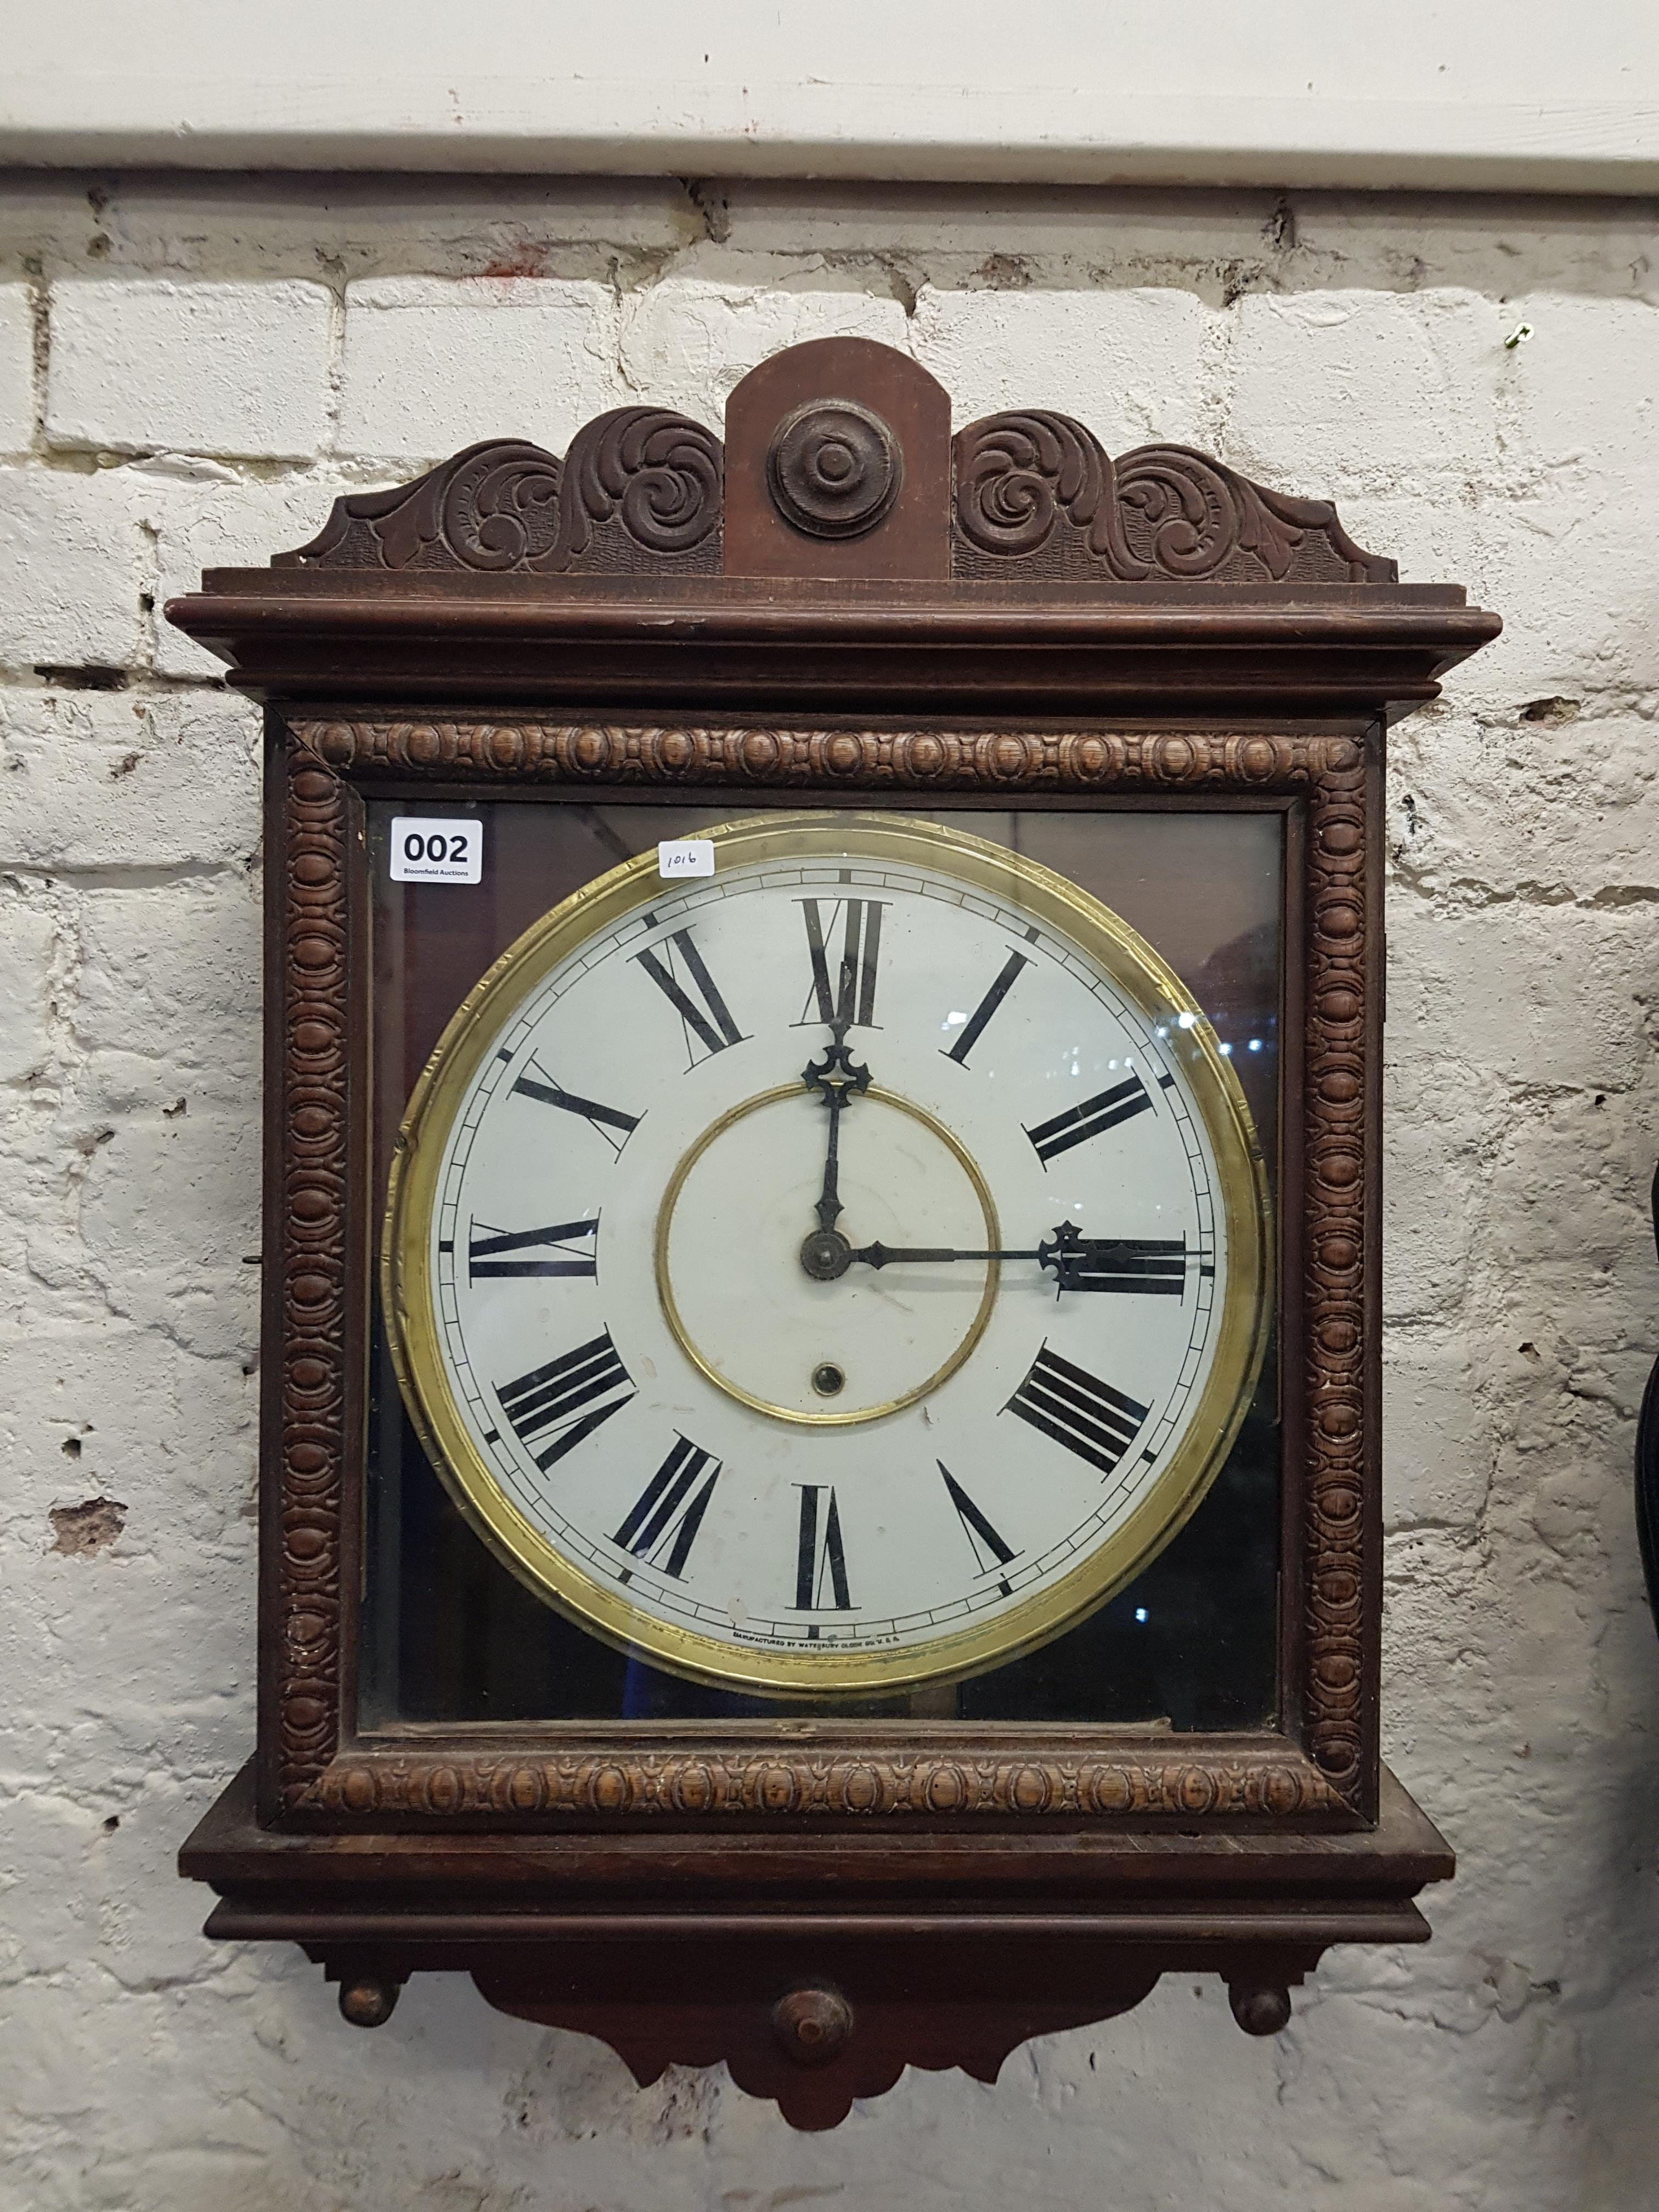 LARGE ANTIQUE WALL CLOCK